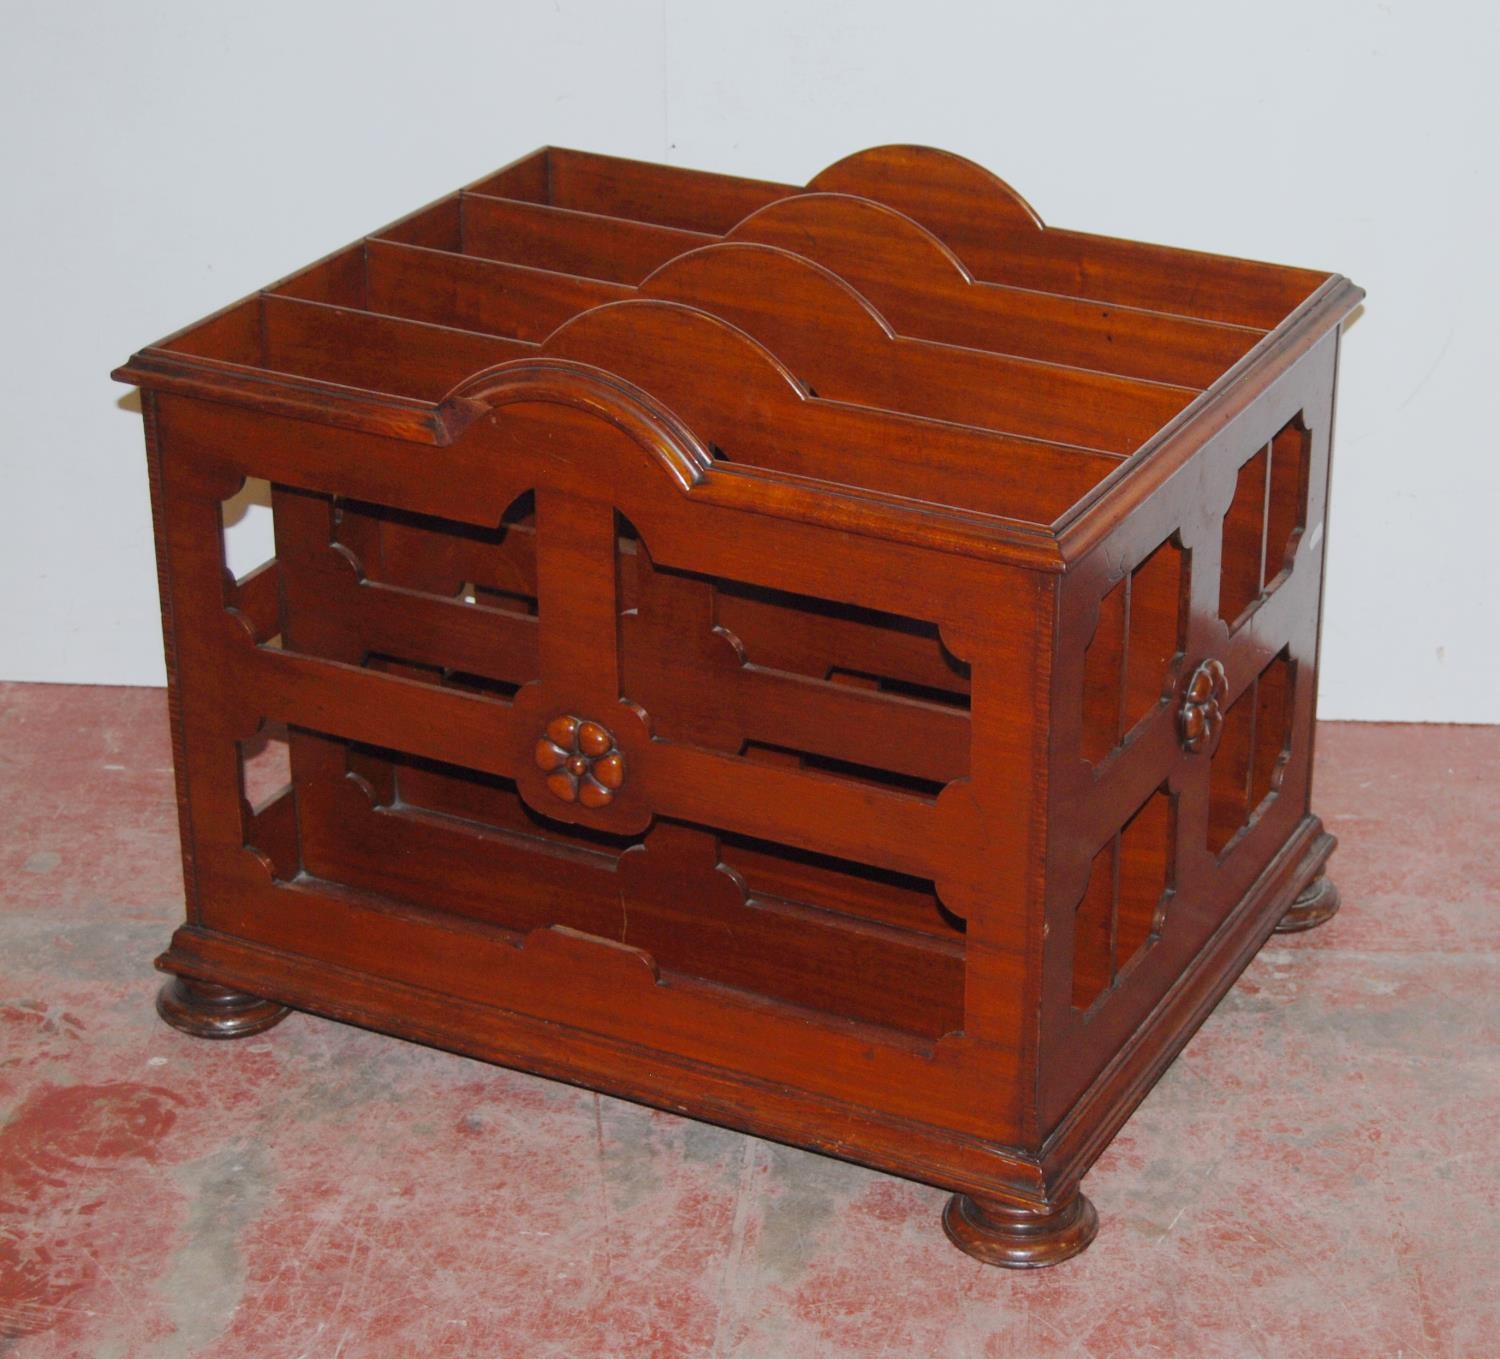 Victorian mahogany canterbury with four shaped divisions, decorated with floral roundels, on bun